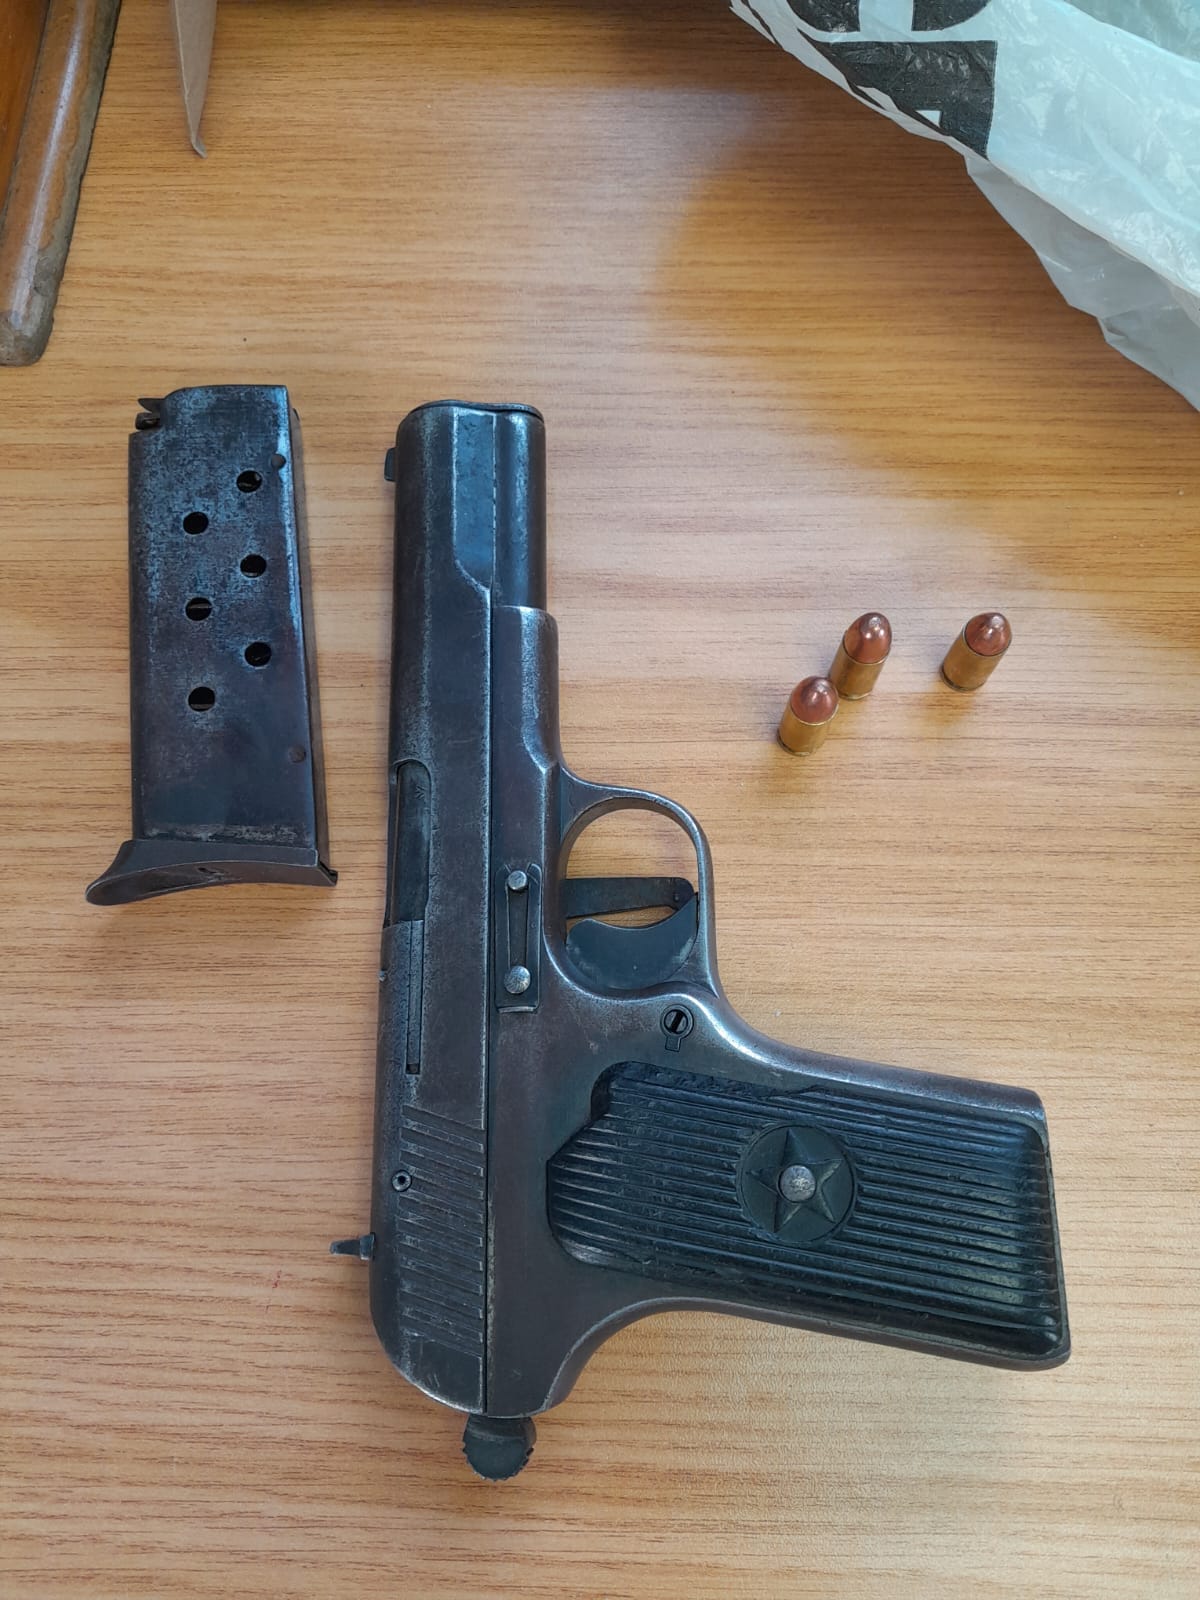 Wanted suspect arrested in possession of unlicensed firearm and ammunition